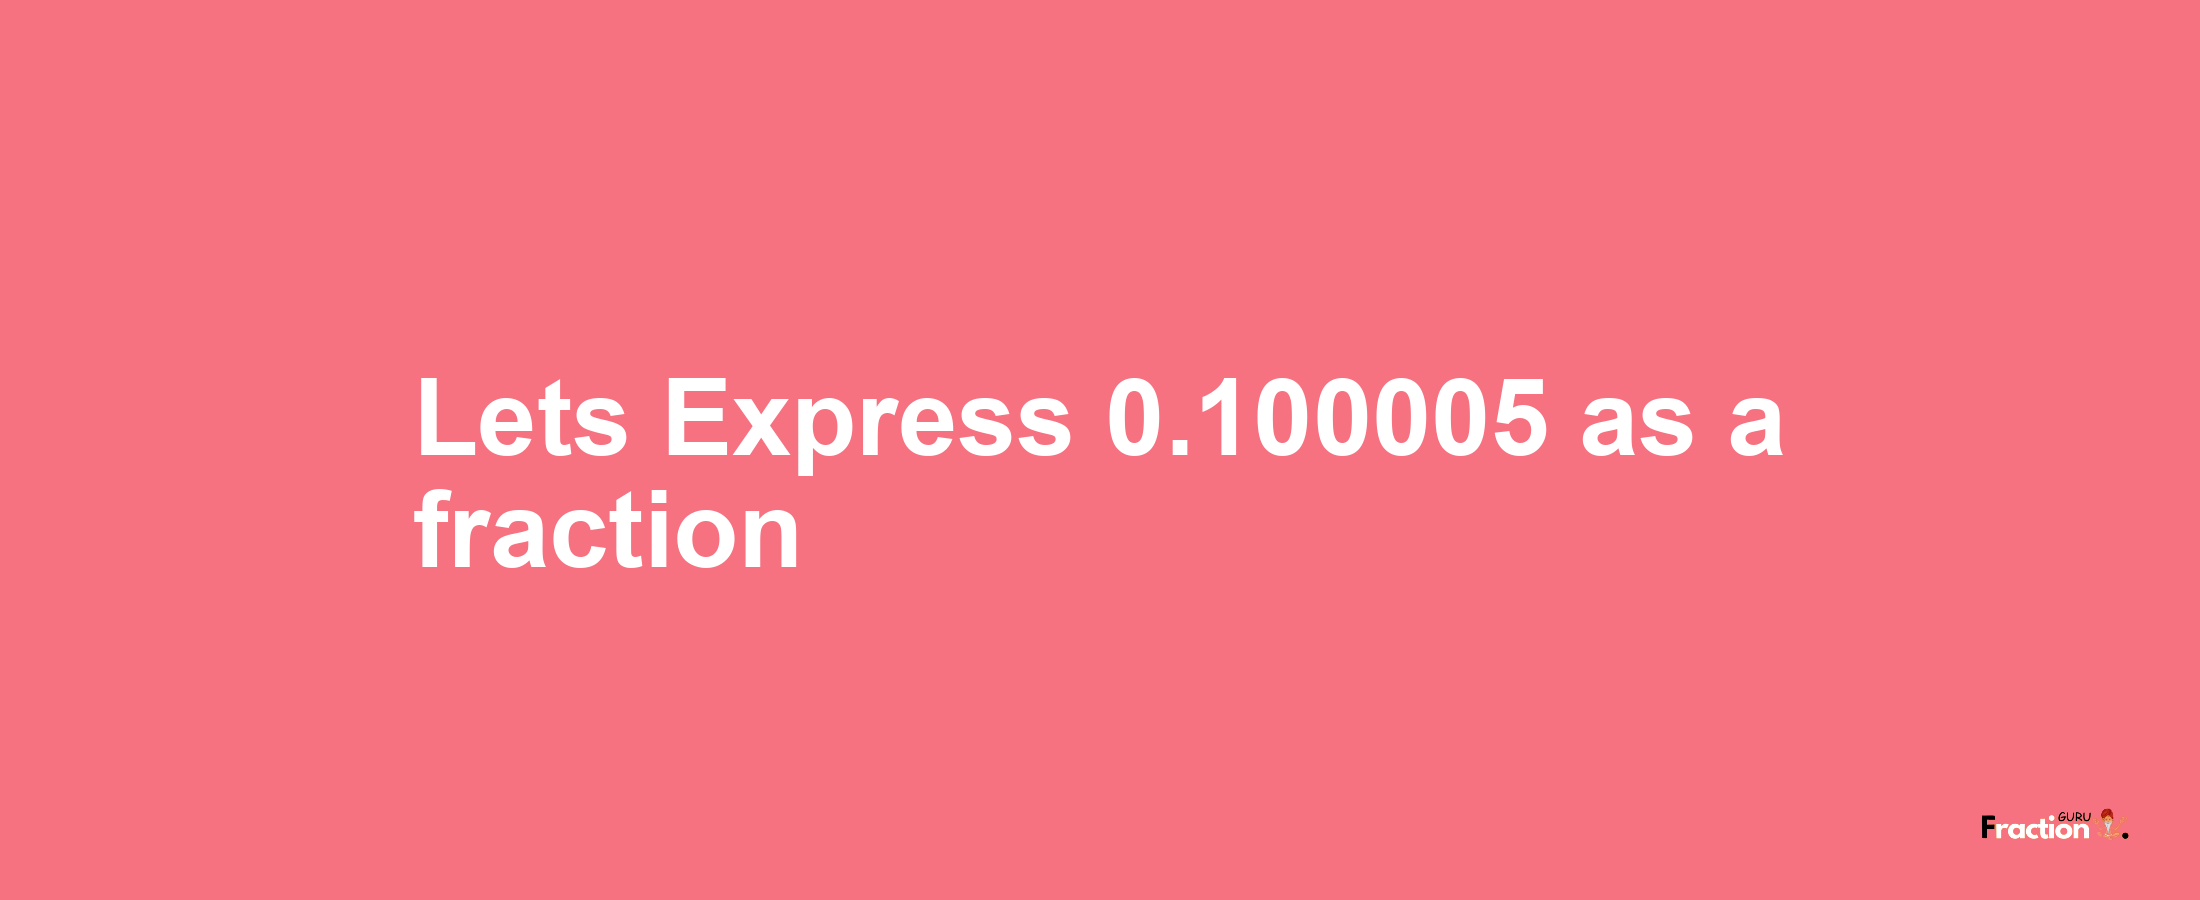 Lets Express 0.100005 as afraction